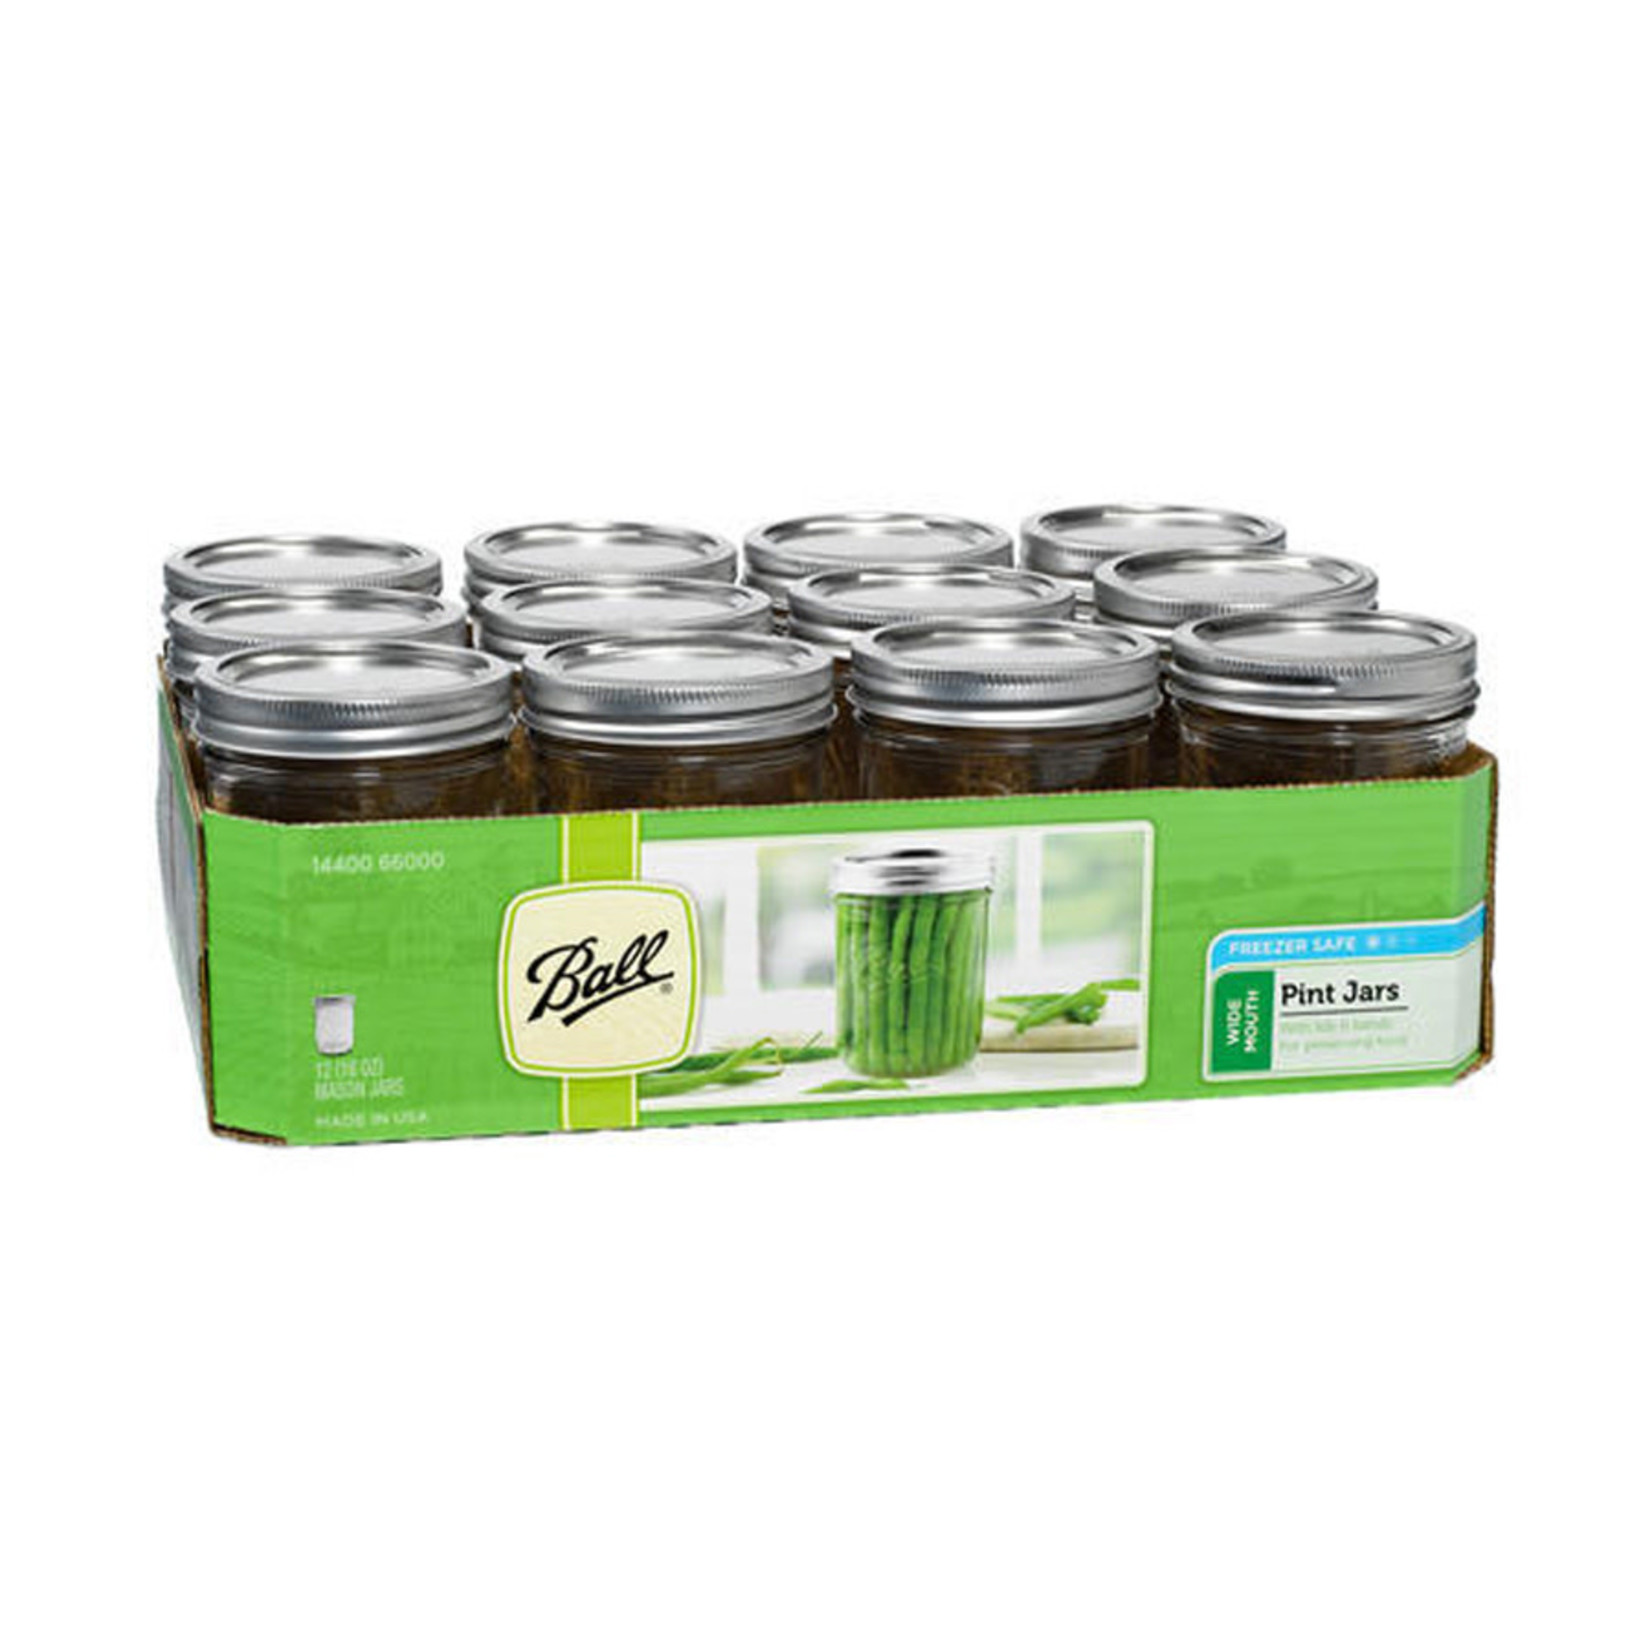 Ball Pint Wide Mouth Mason Jar 12-pack - West Lebanon Feed and Supply